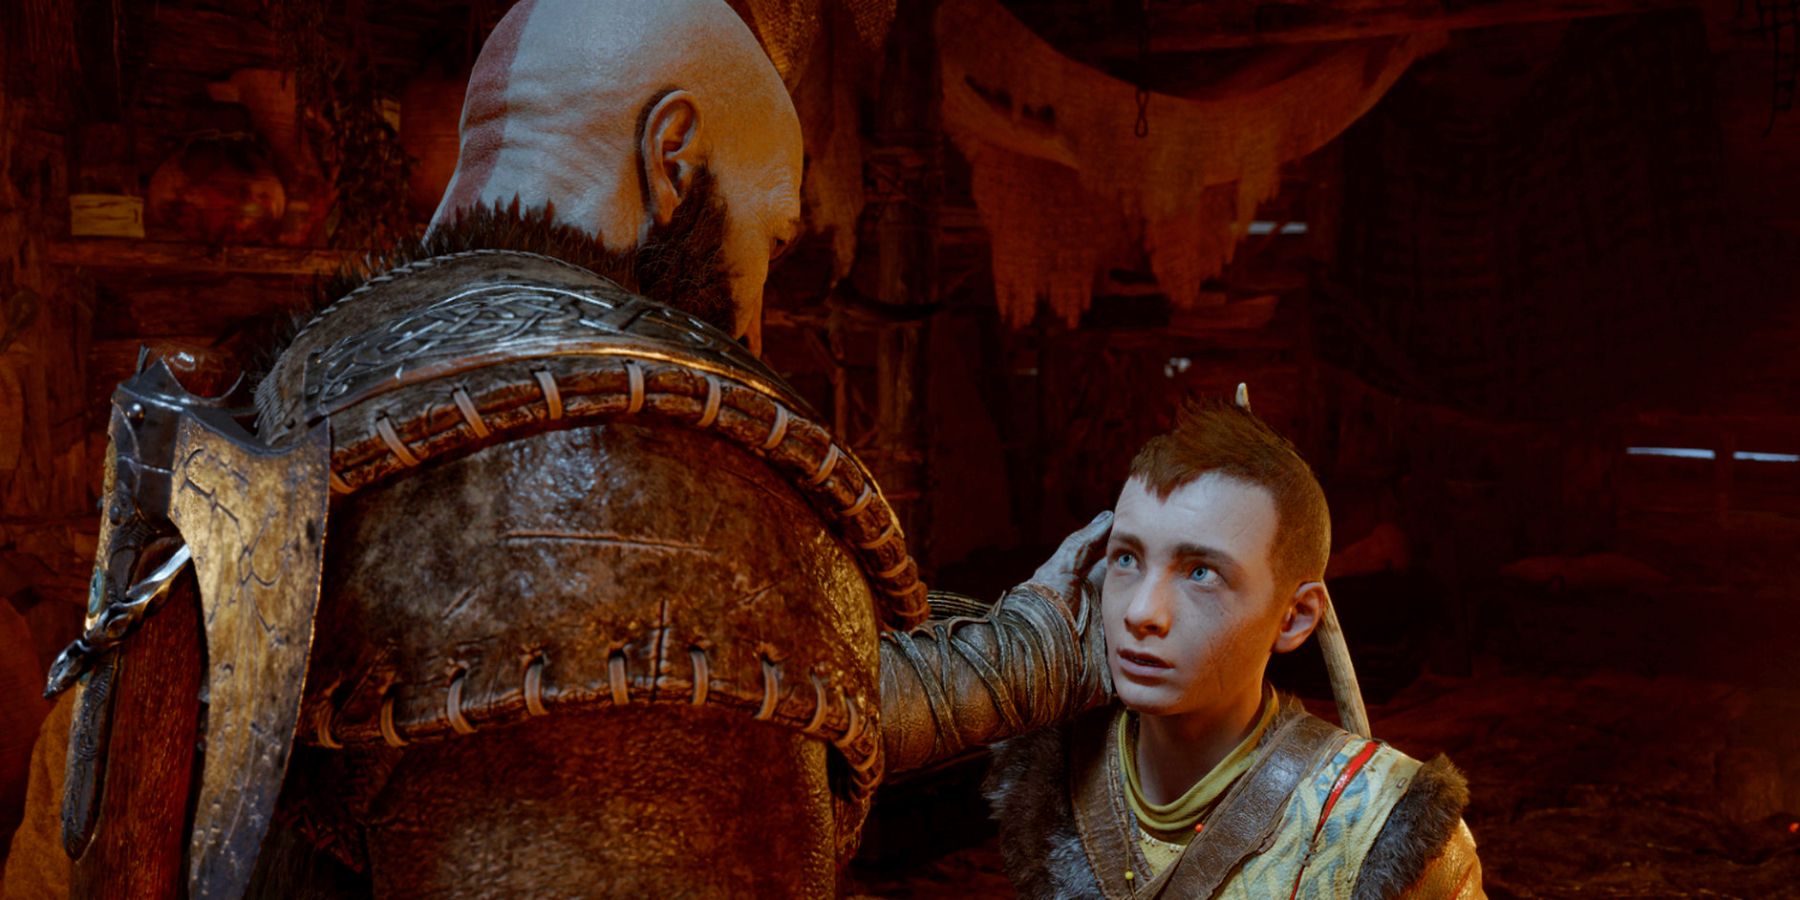 Kratos touching Atreus' face as he talks to his son in their home in Midgard in God of War Ragnarok.